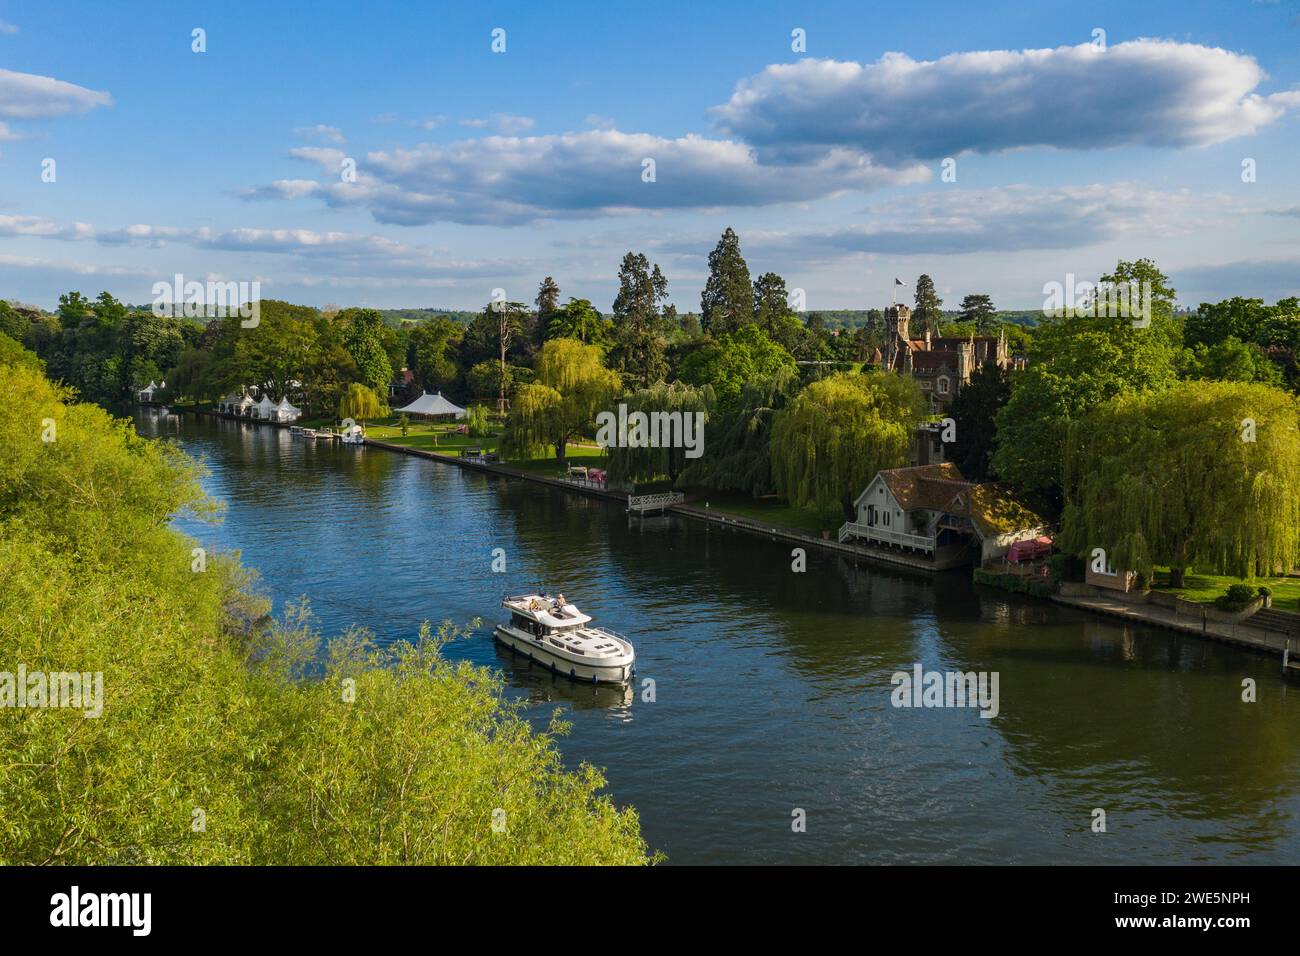 Aerial view of a Le Boat Horizon 4 houseboat passing the Oakley Court Hotel along the River Thames, Water Oakley, near Windsor, Berkshire, England, Un Stock Photo